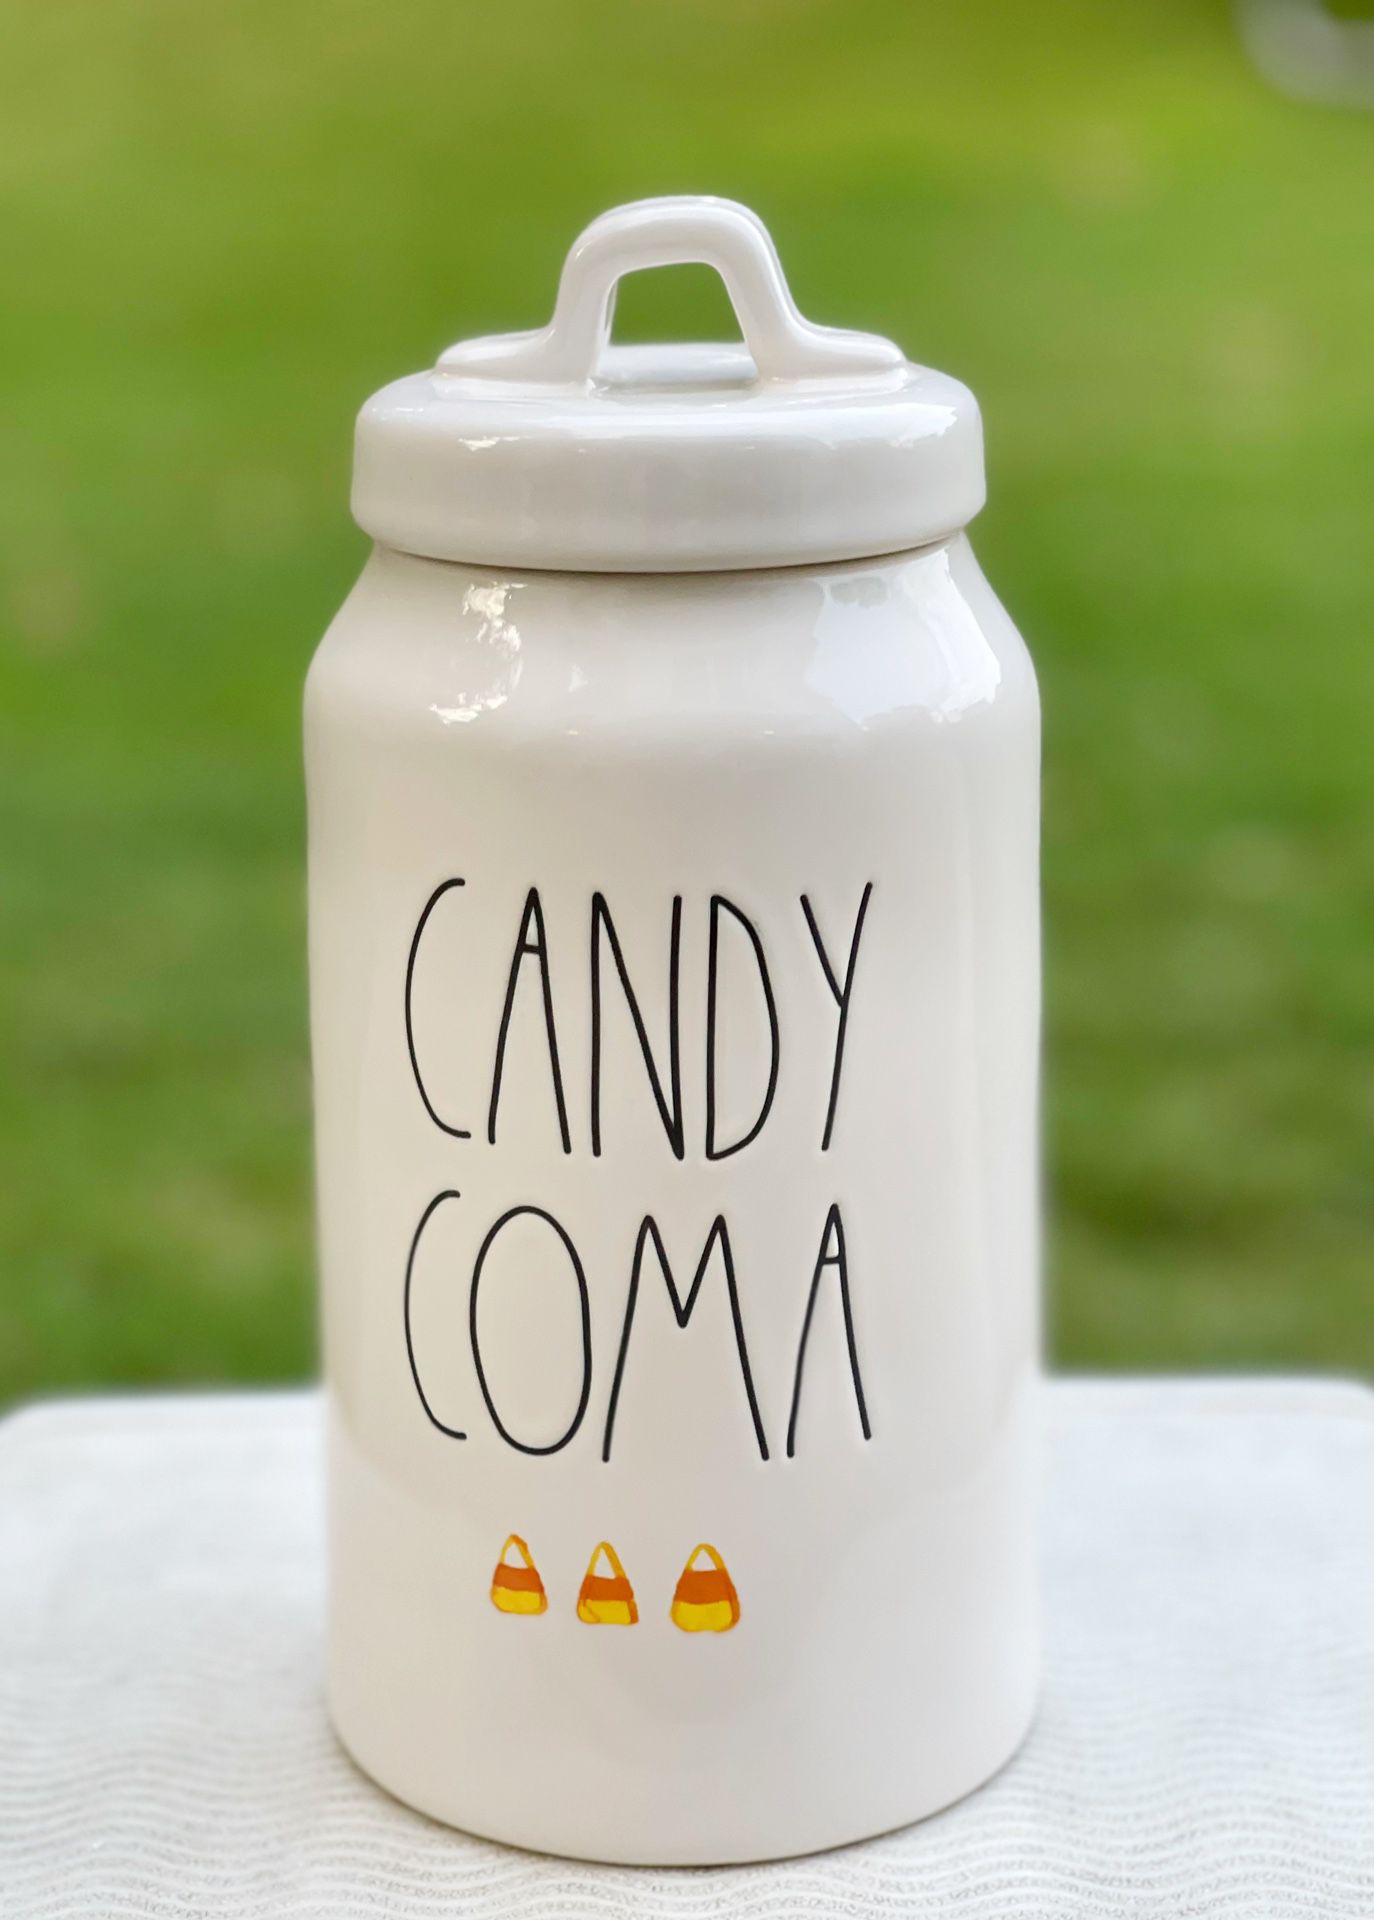 Rae Dunn Candy Coma canister 